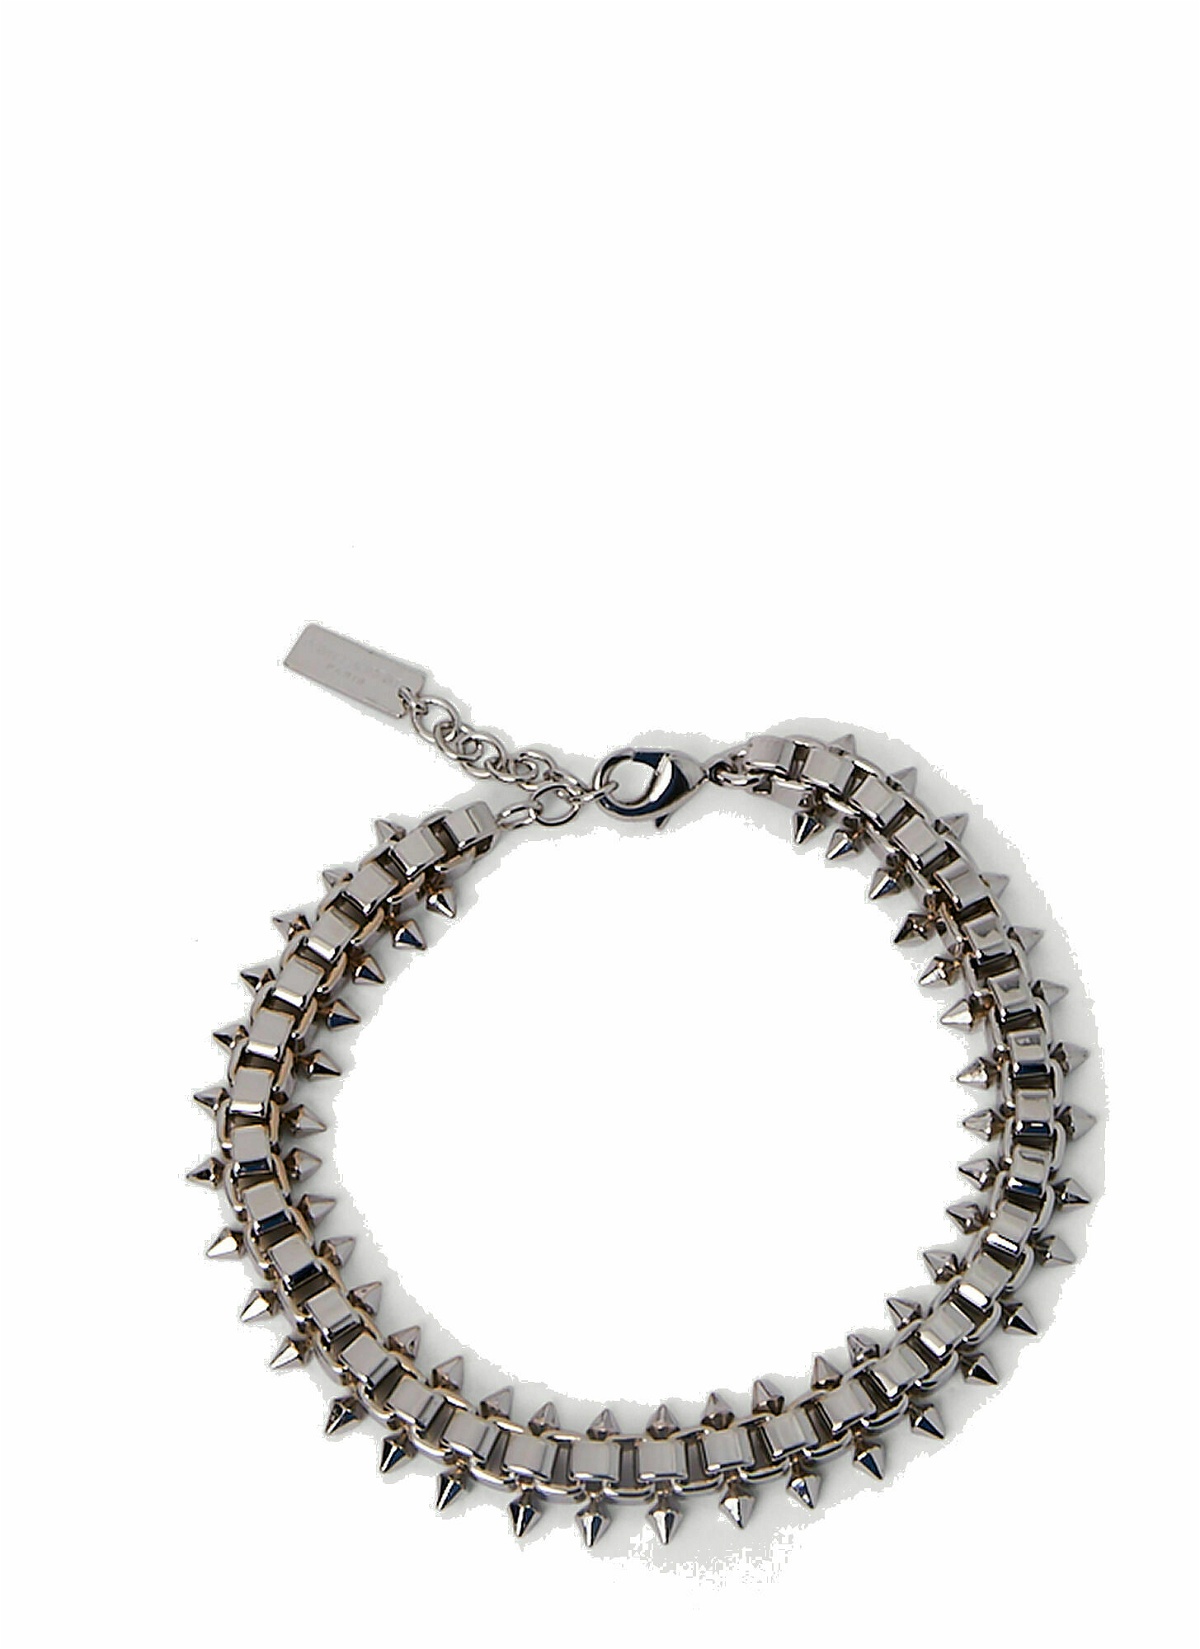 Photo: Squares and Spikes Bracelet in Silver